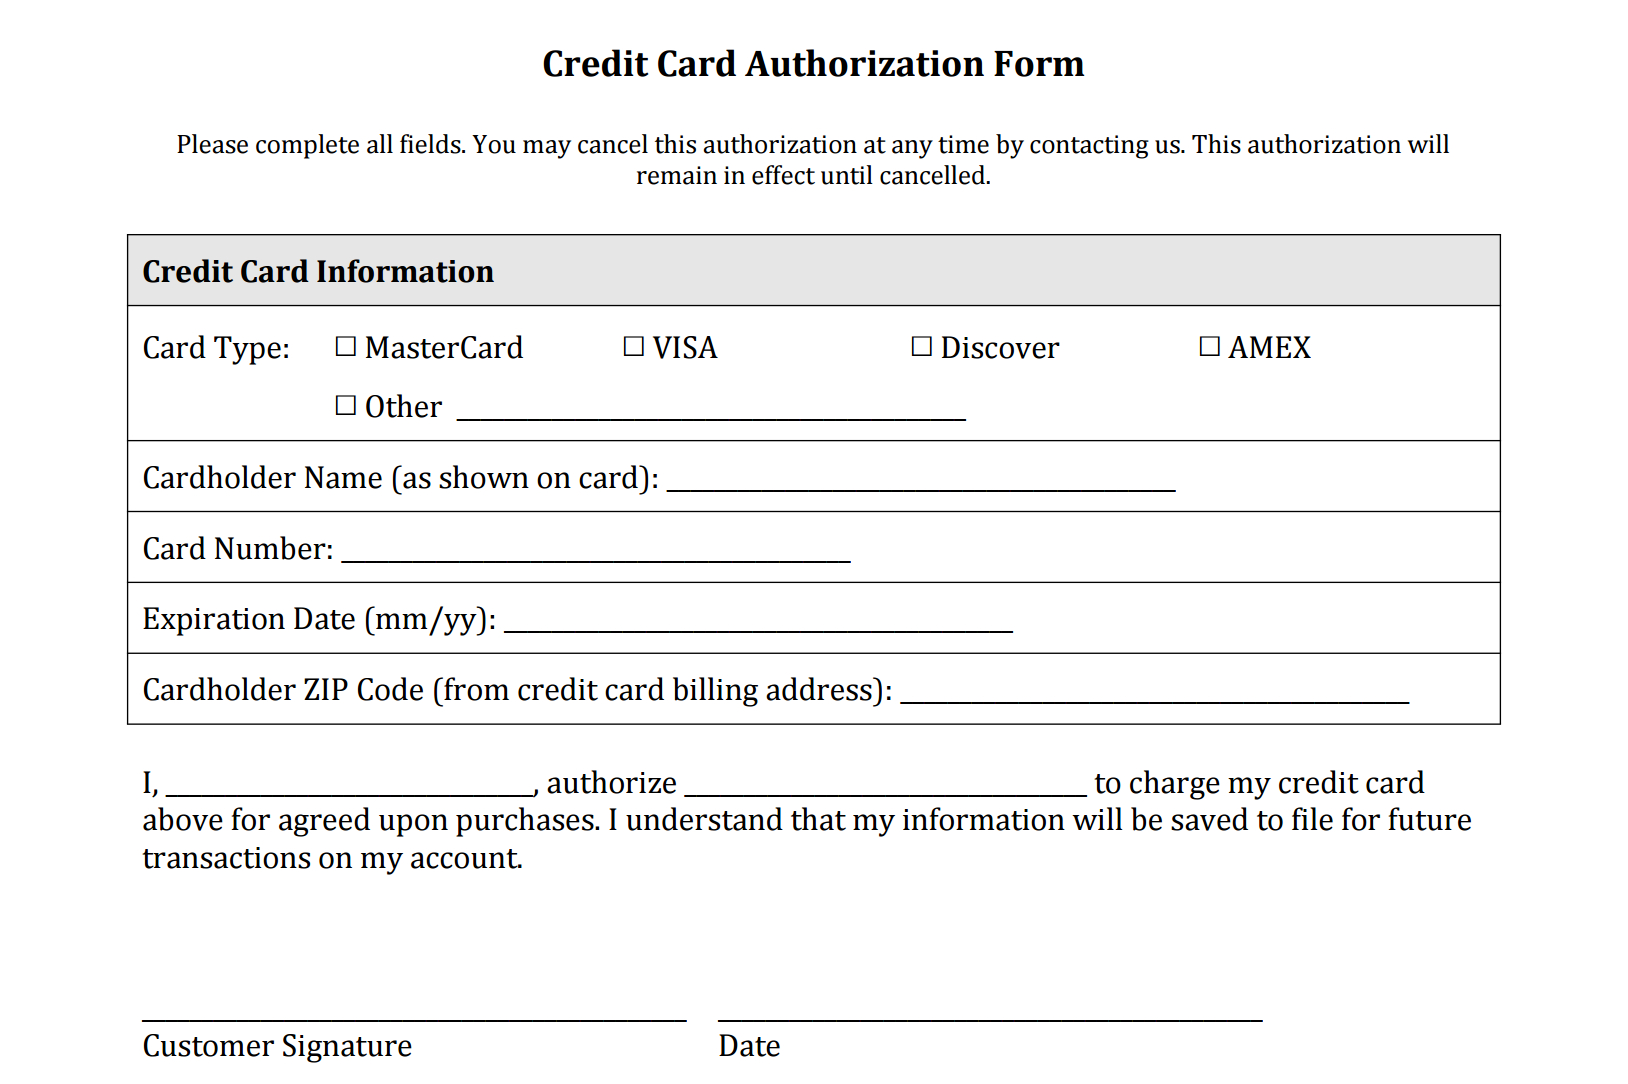 Credit Card Authorization Form Templates [Download] In Credit Card Authorisation Form Template Australia